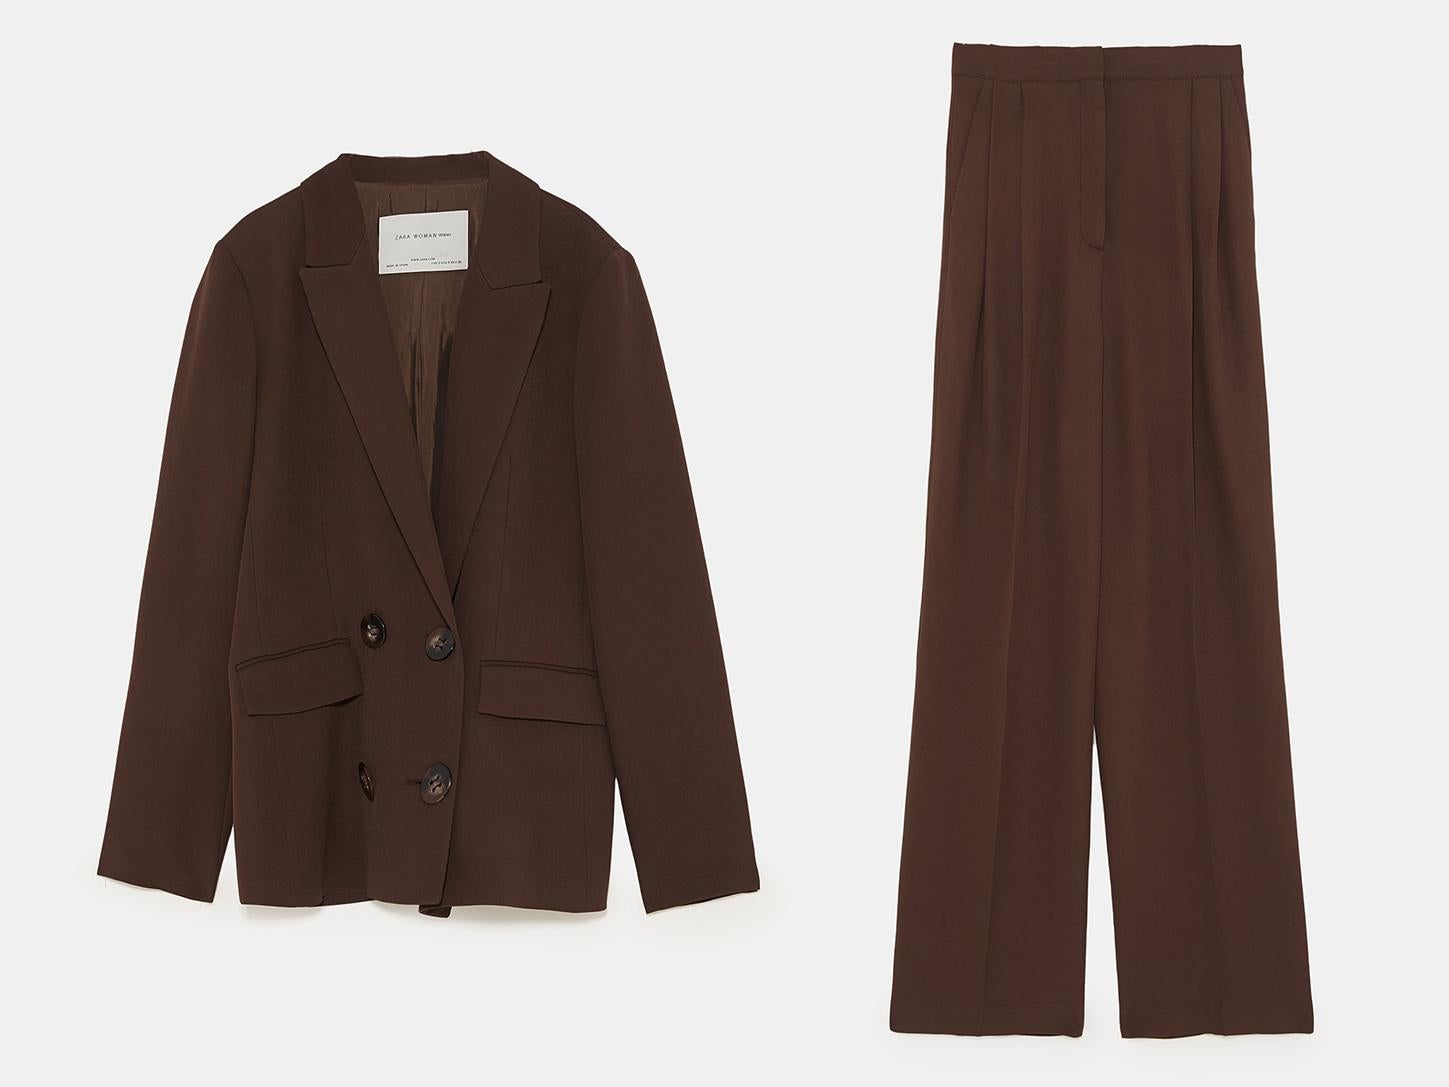 Double-Breasted Blazer, £119, Pleated Trousers, £79.99, Zara